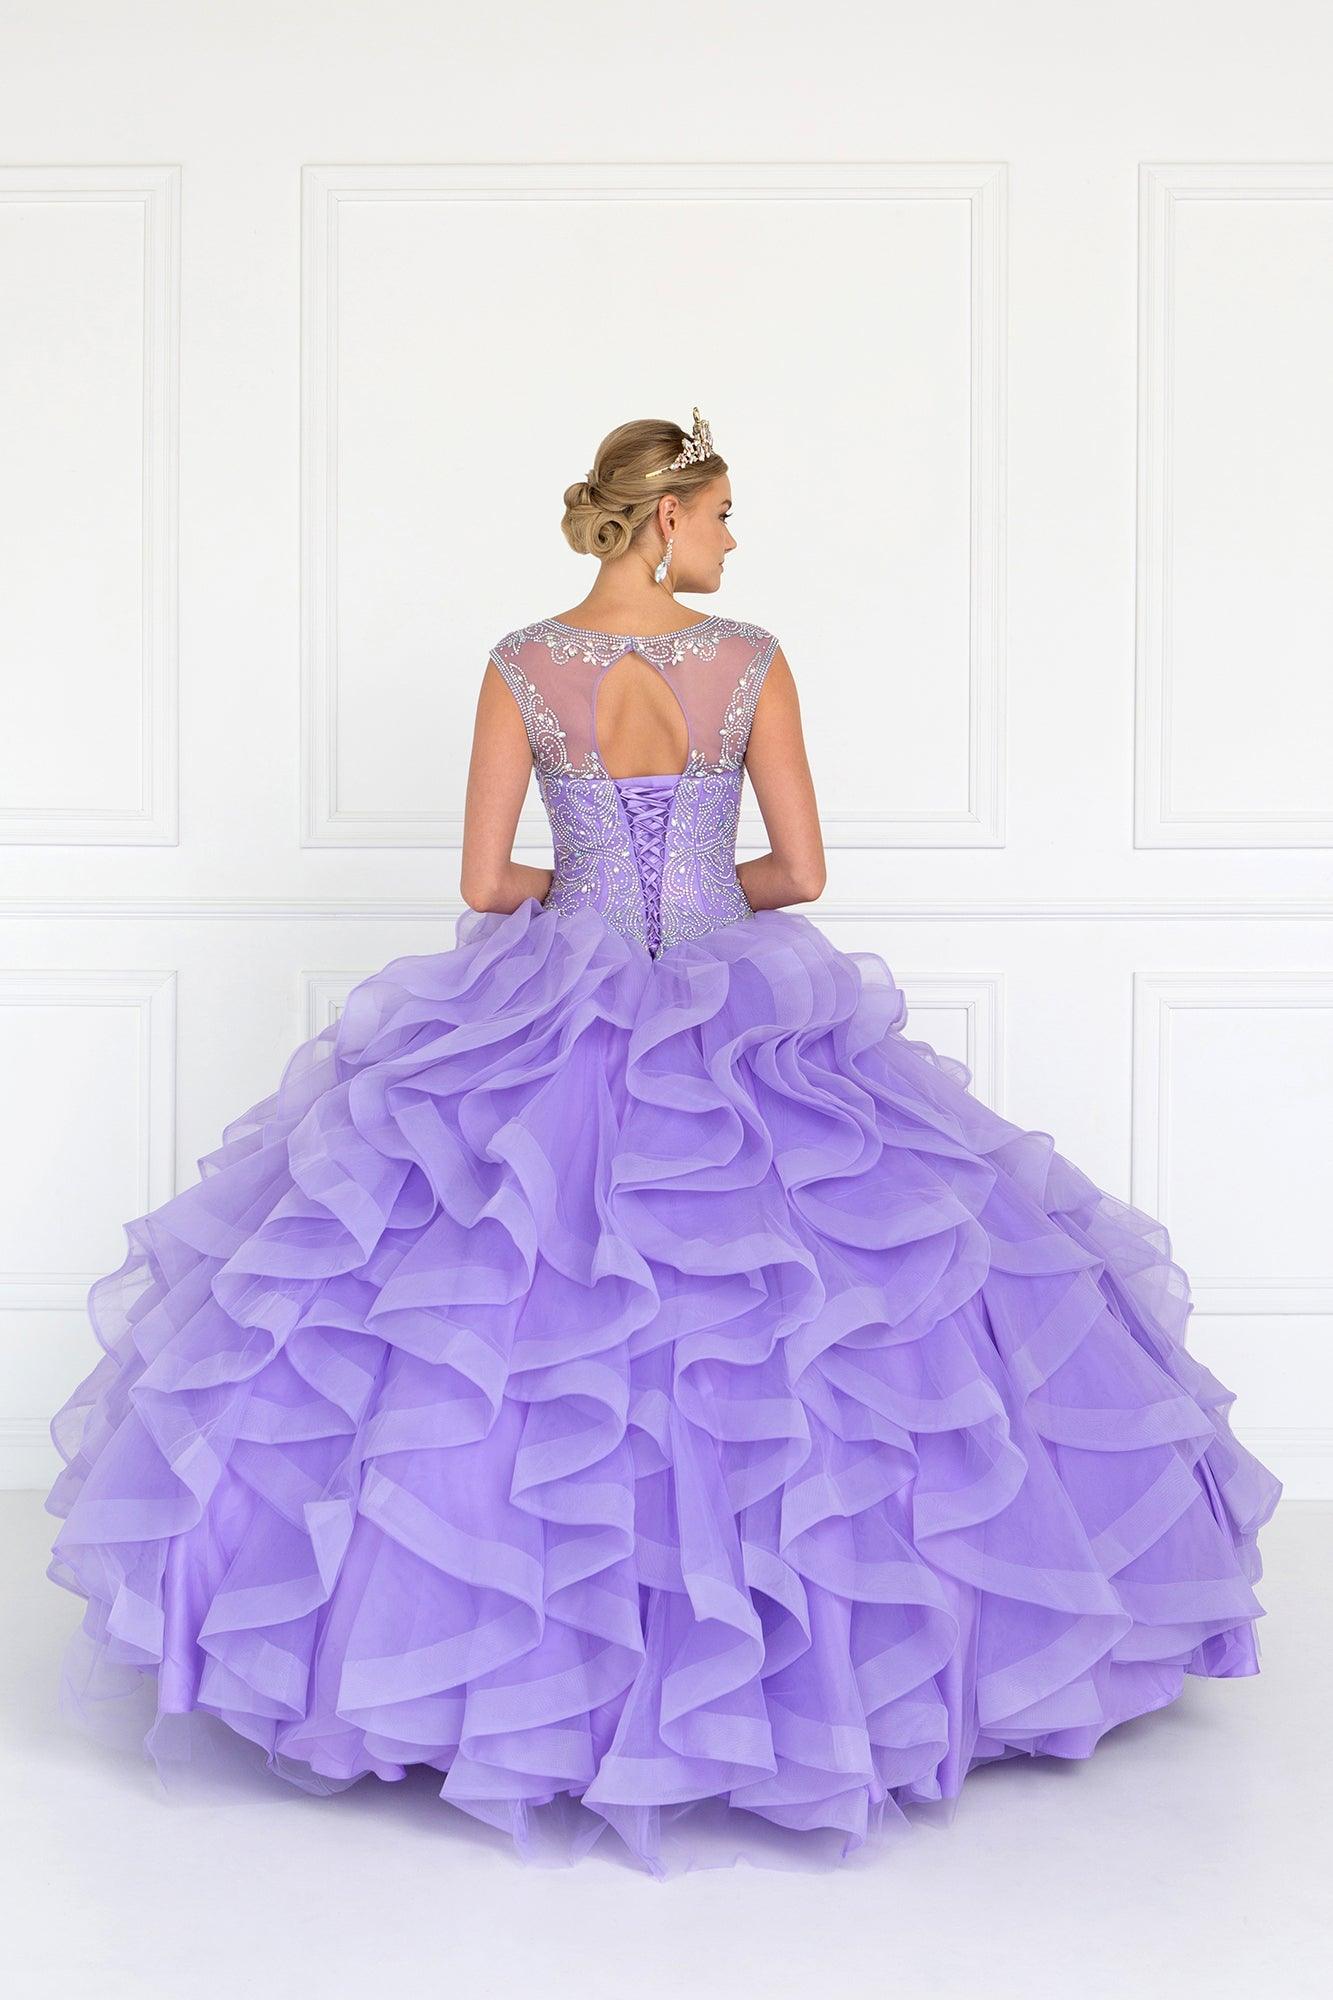 Quinceanera Cut-Out Back Ball Gown Dress with Bolero - The Dress Outlet